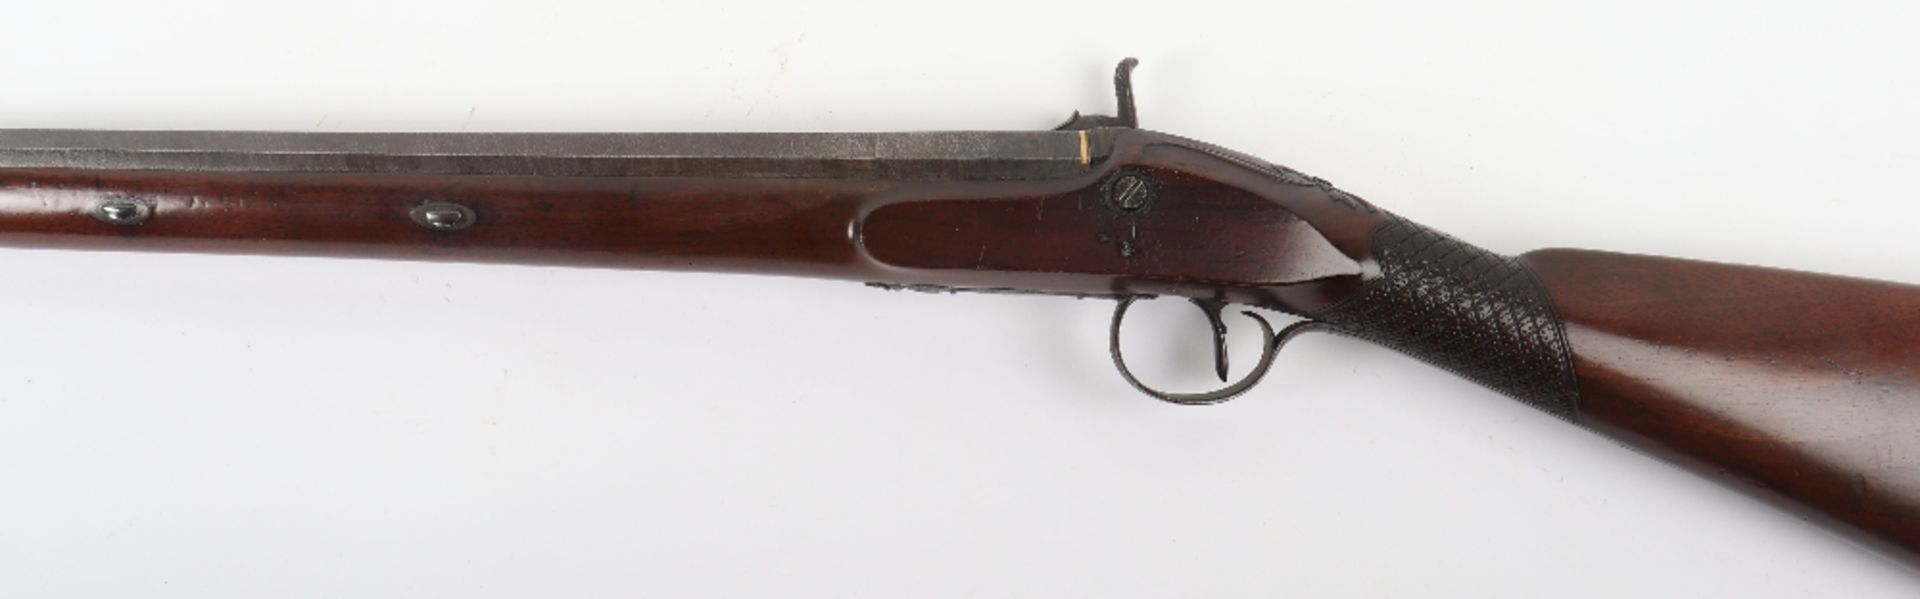 16-Bore Percussion Sporting Gun by D. Egg, Late 18th Century - Image 13 of 15